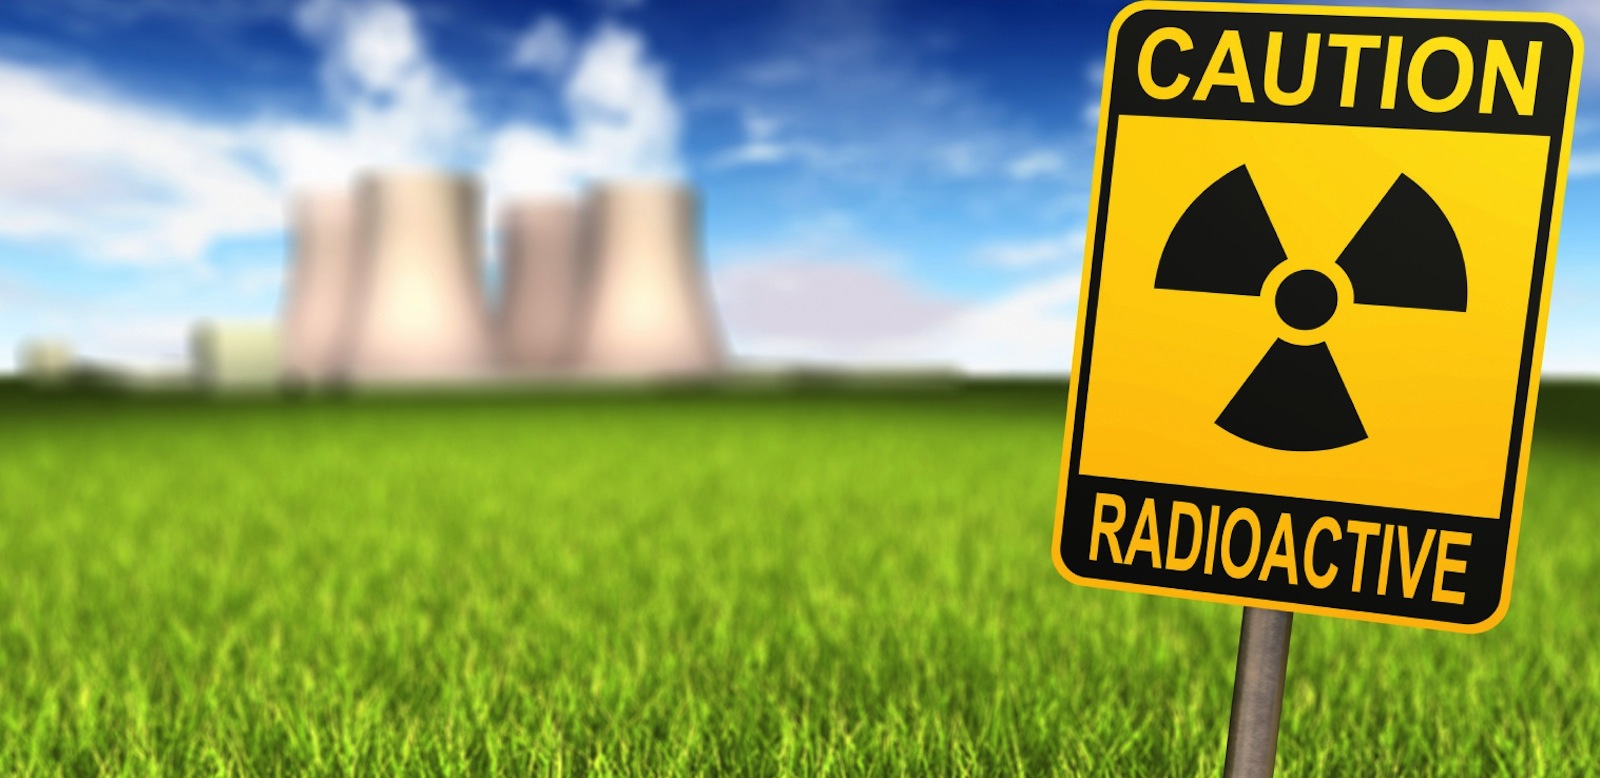 Radiation Safety - Safely Working with Radioactive Materials